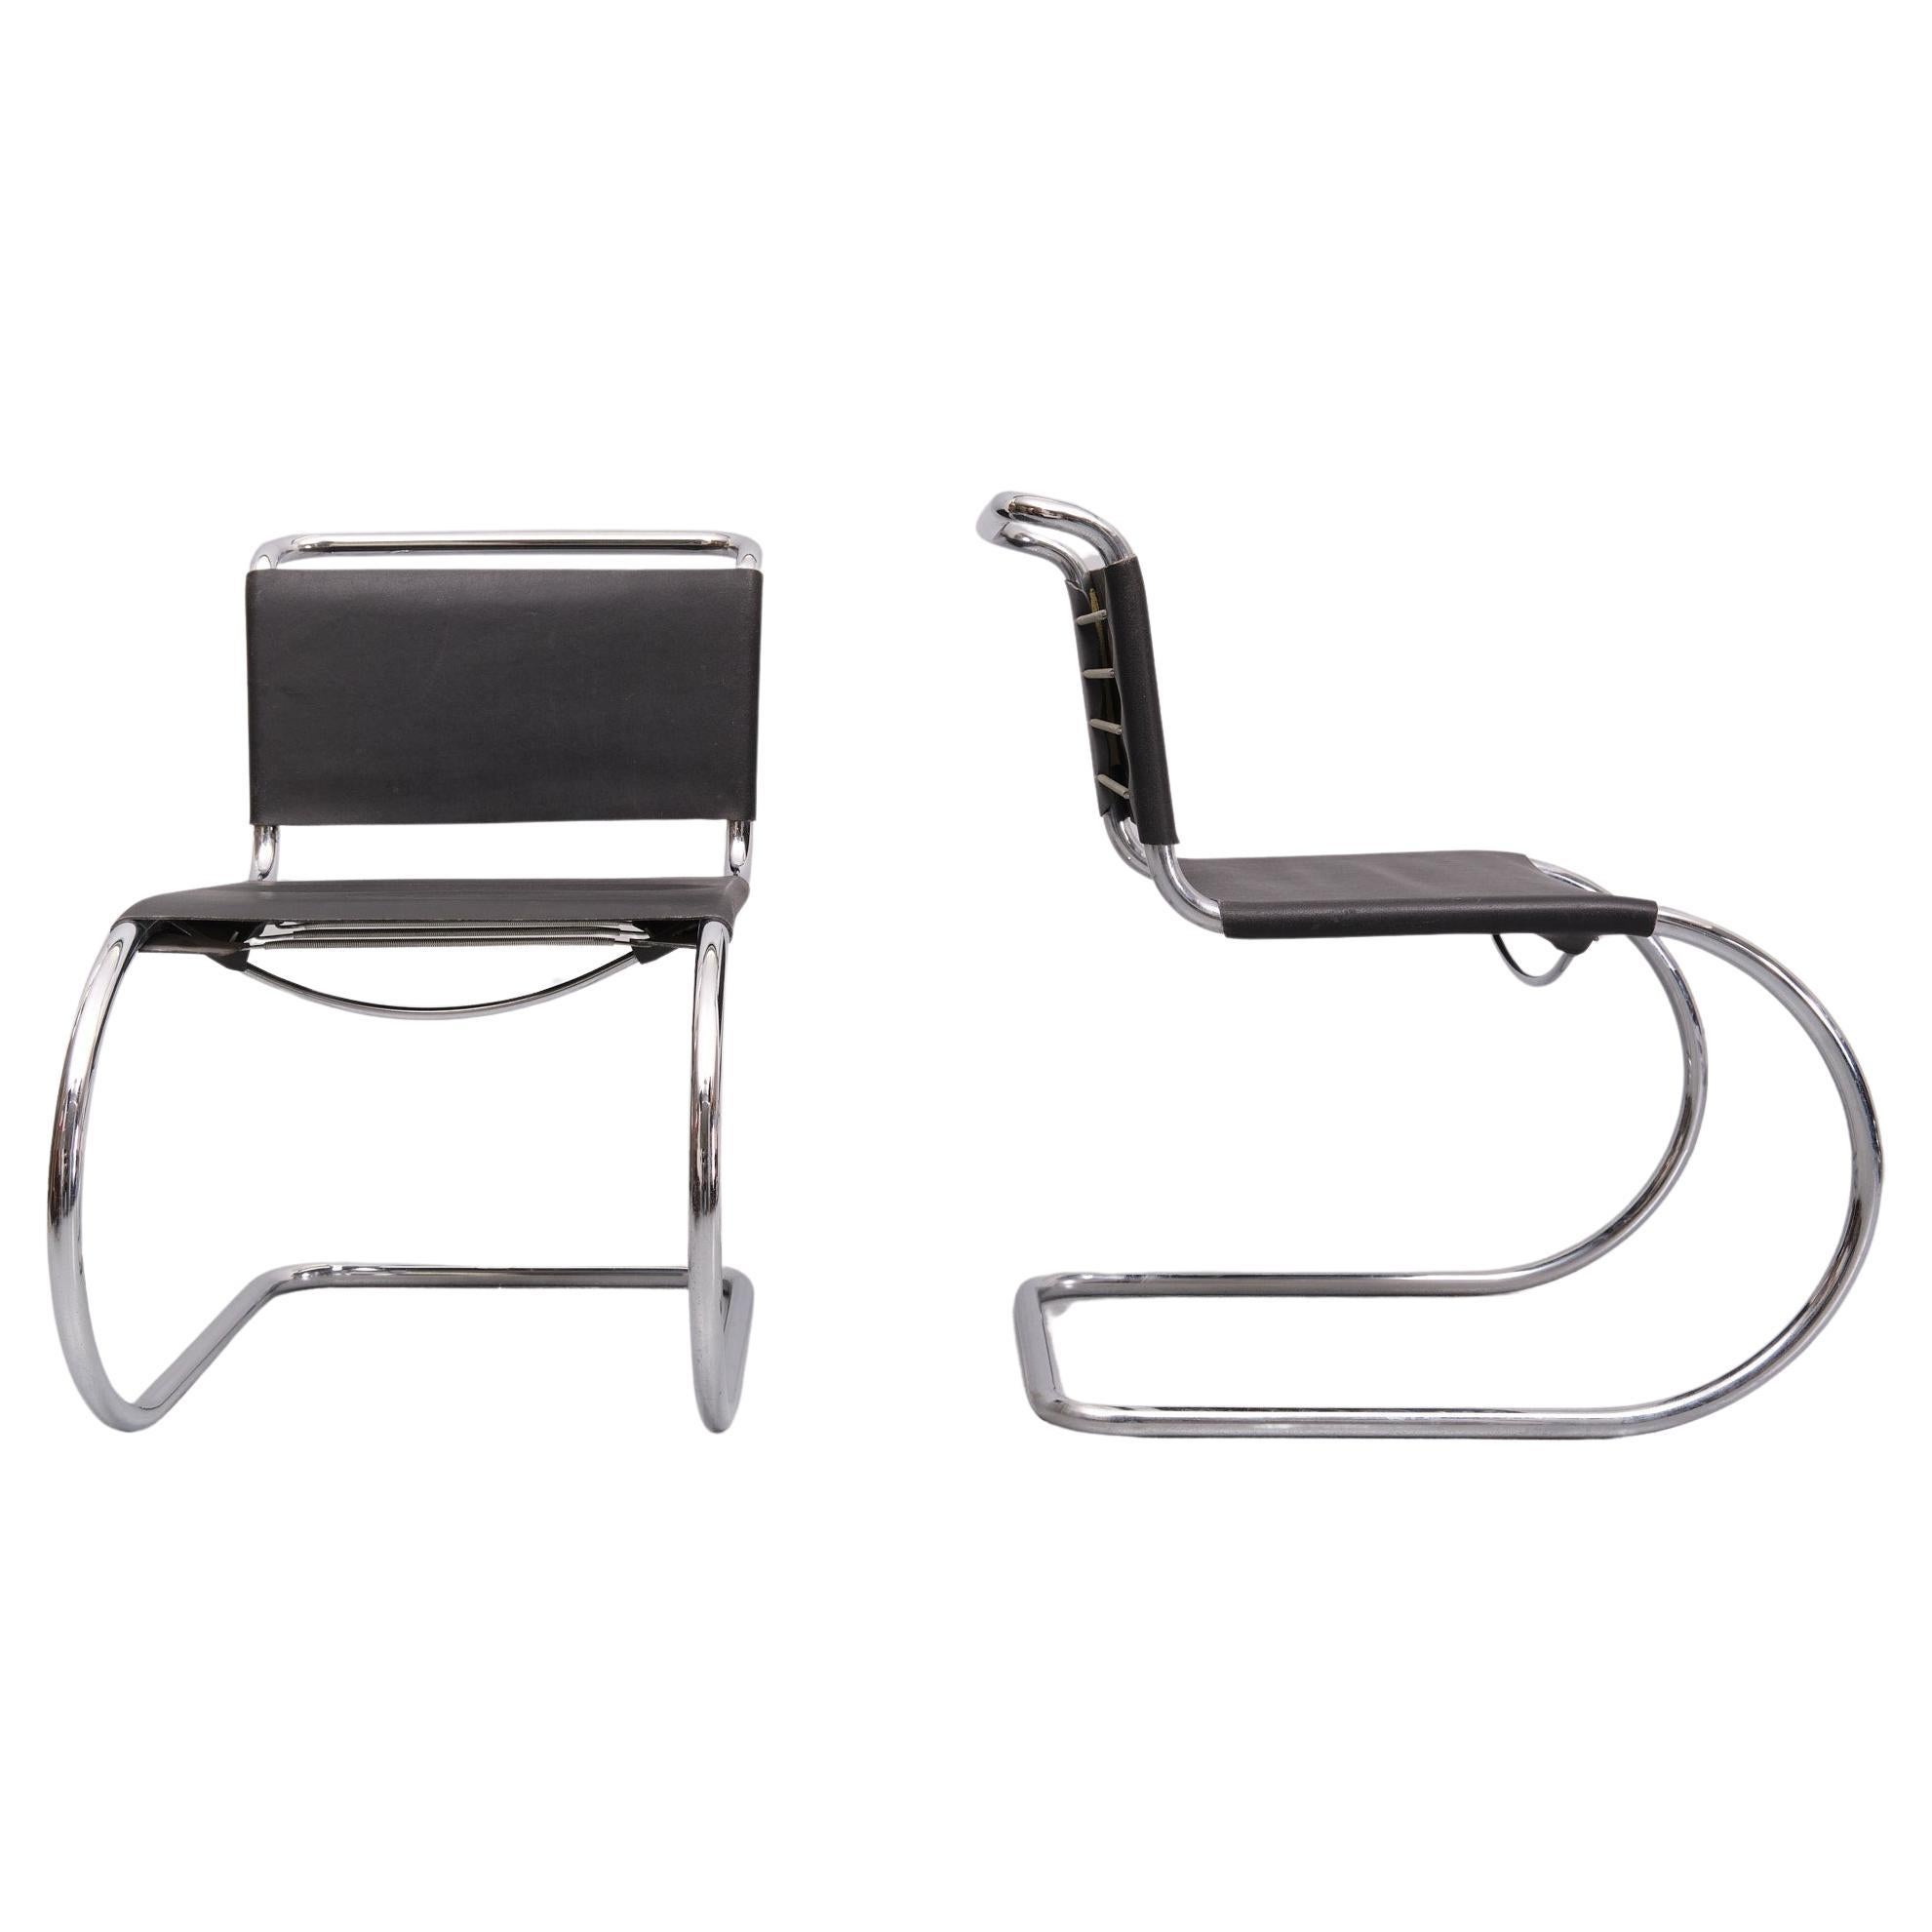 Two iconic MR10 cantilever chairs . Design by Ludwig Mies van der Rohe 
Chrome tube frame ,comes with Black Leather upholstery . 
This set of chairs is an early 1960s example of his famous design The MR10 chair was first designed in the 1920s, and